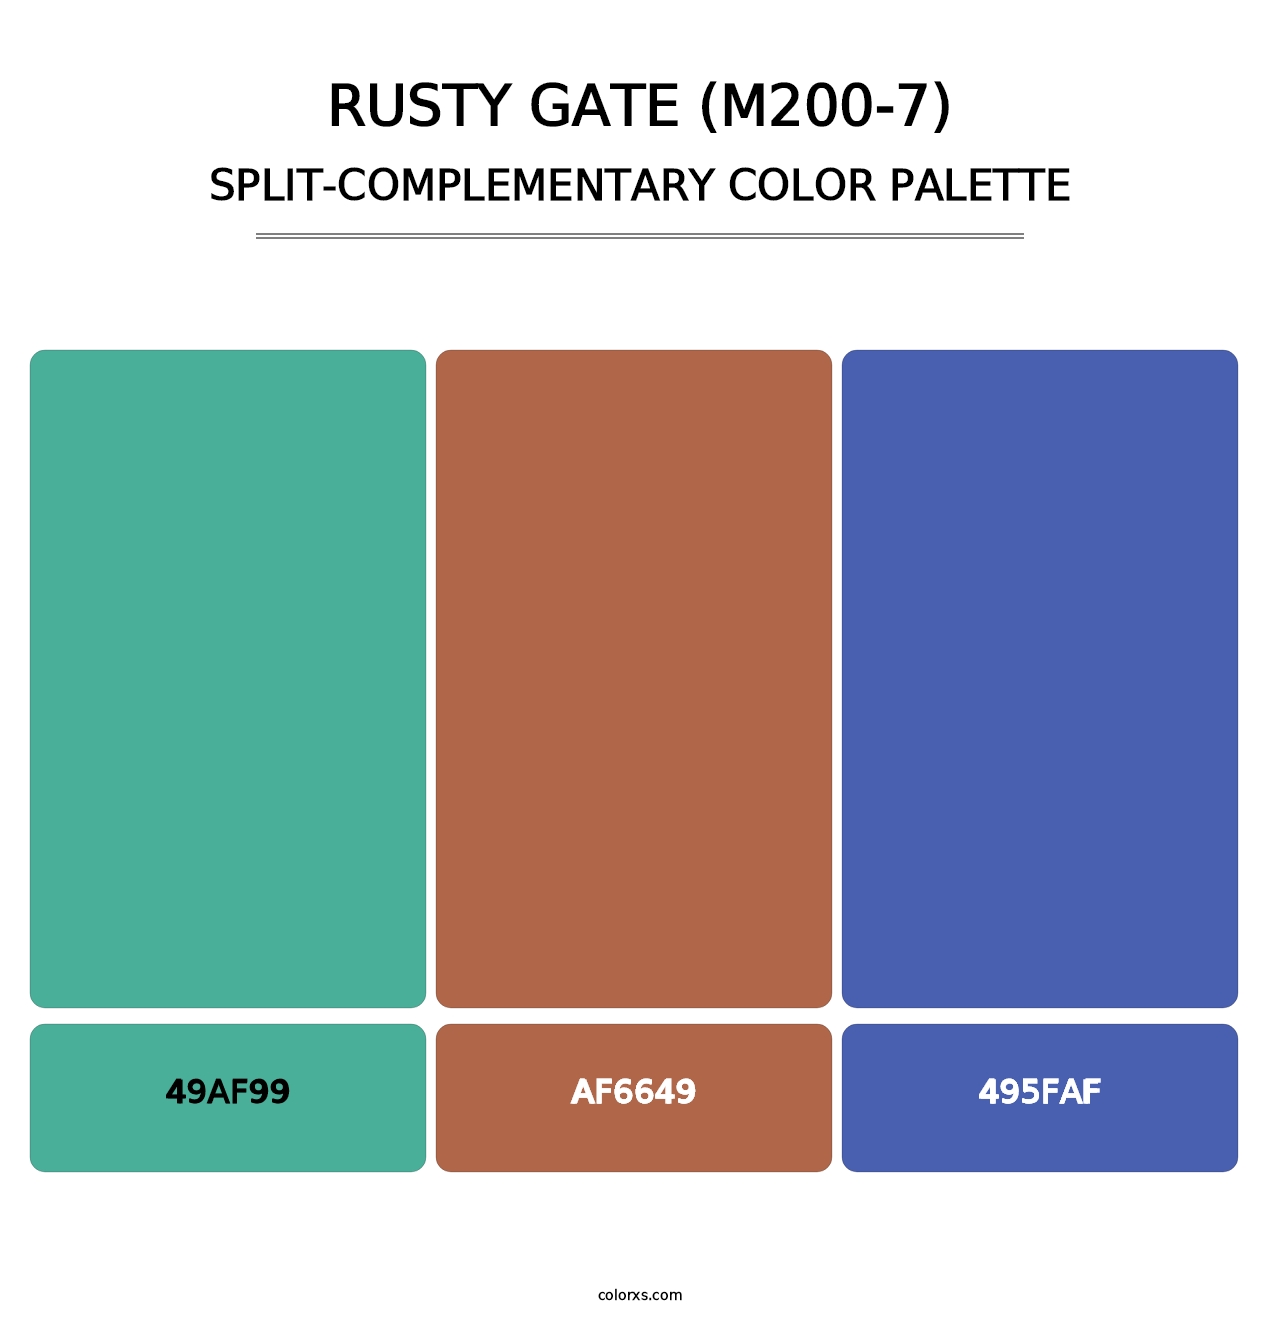 Rusty Gate (M200-7) - Split-Complementary Color Palette